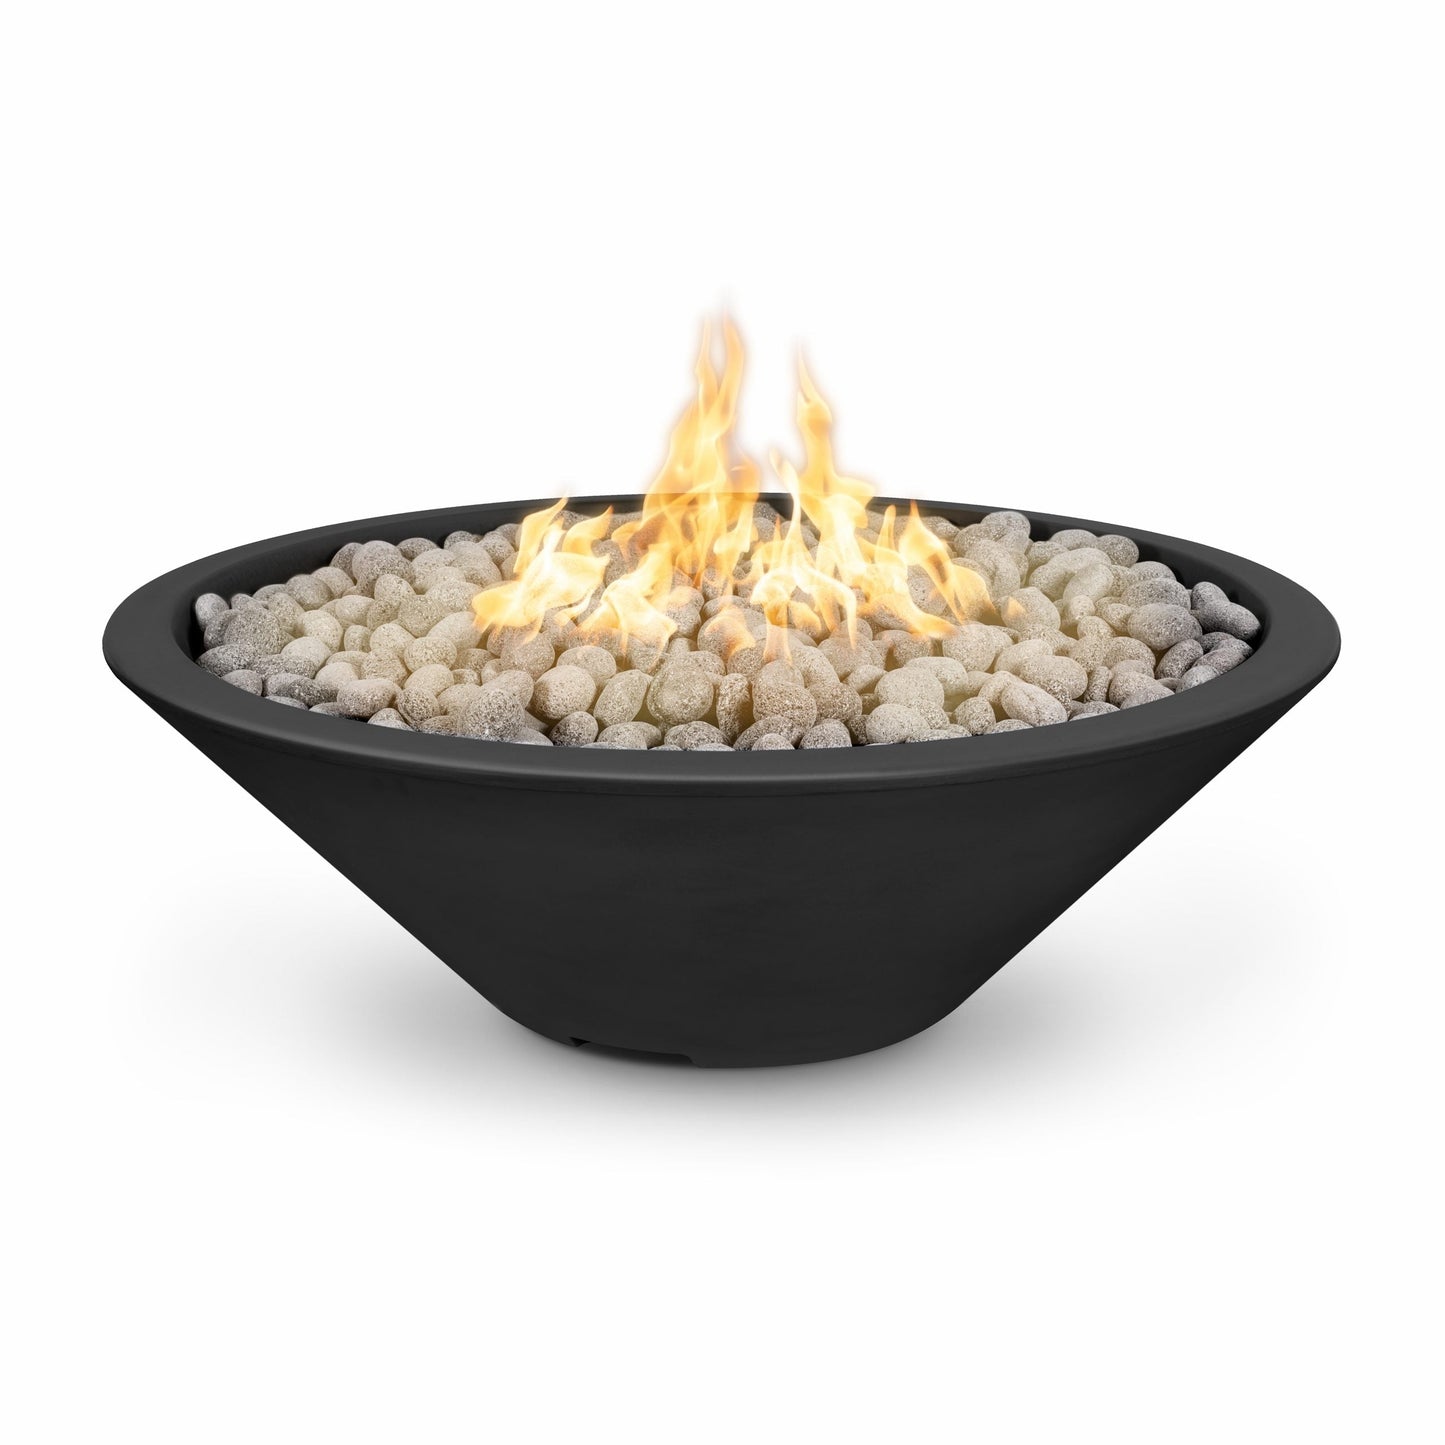 The Outdoor Plus Round Cazo 48" Gray Powder Coated Metal Liquid Propane Fire Pit with Match Lit Ignition